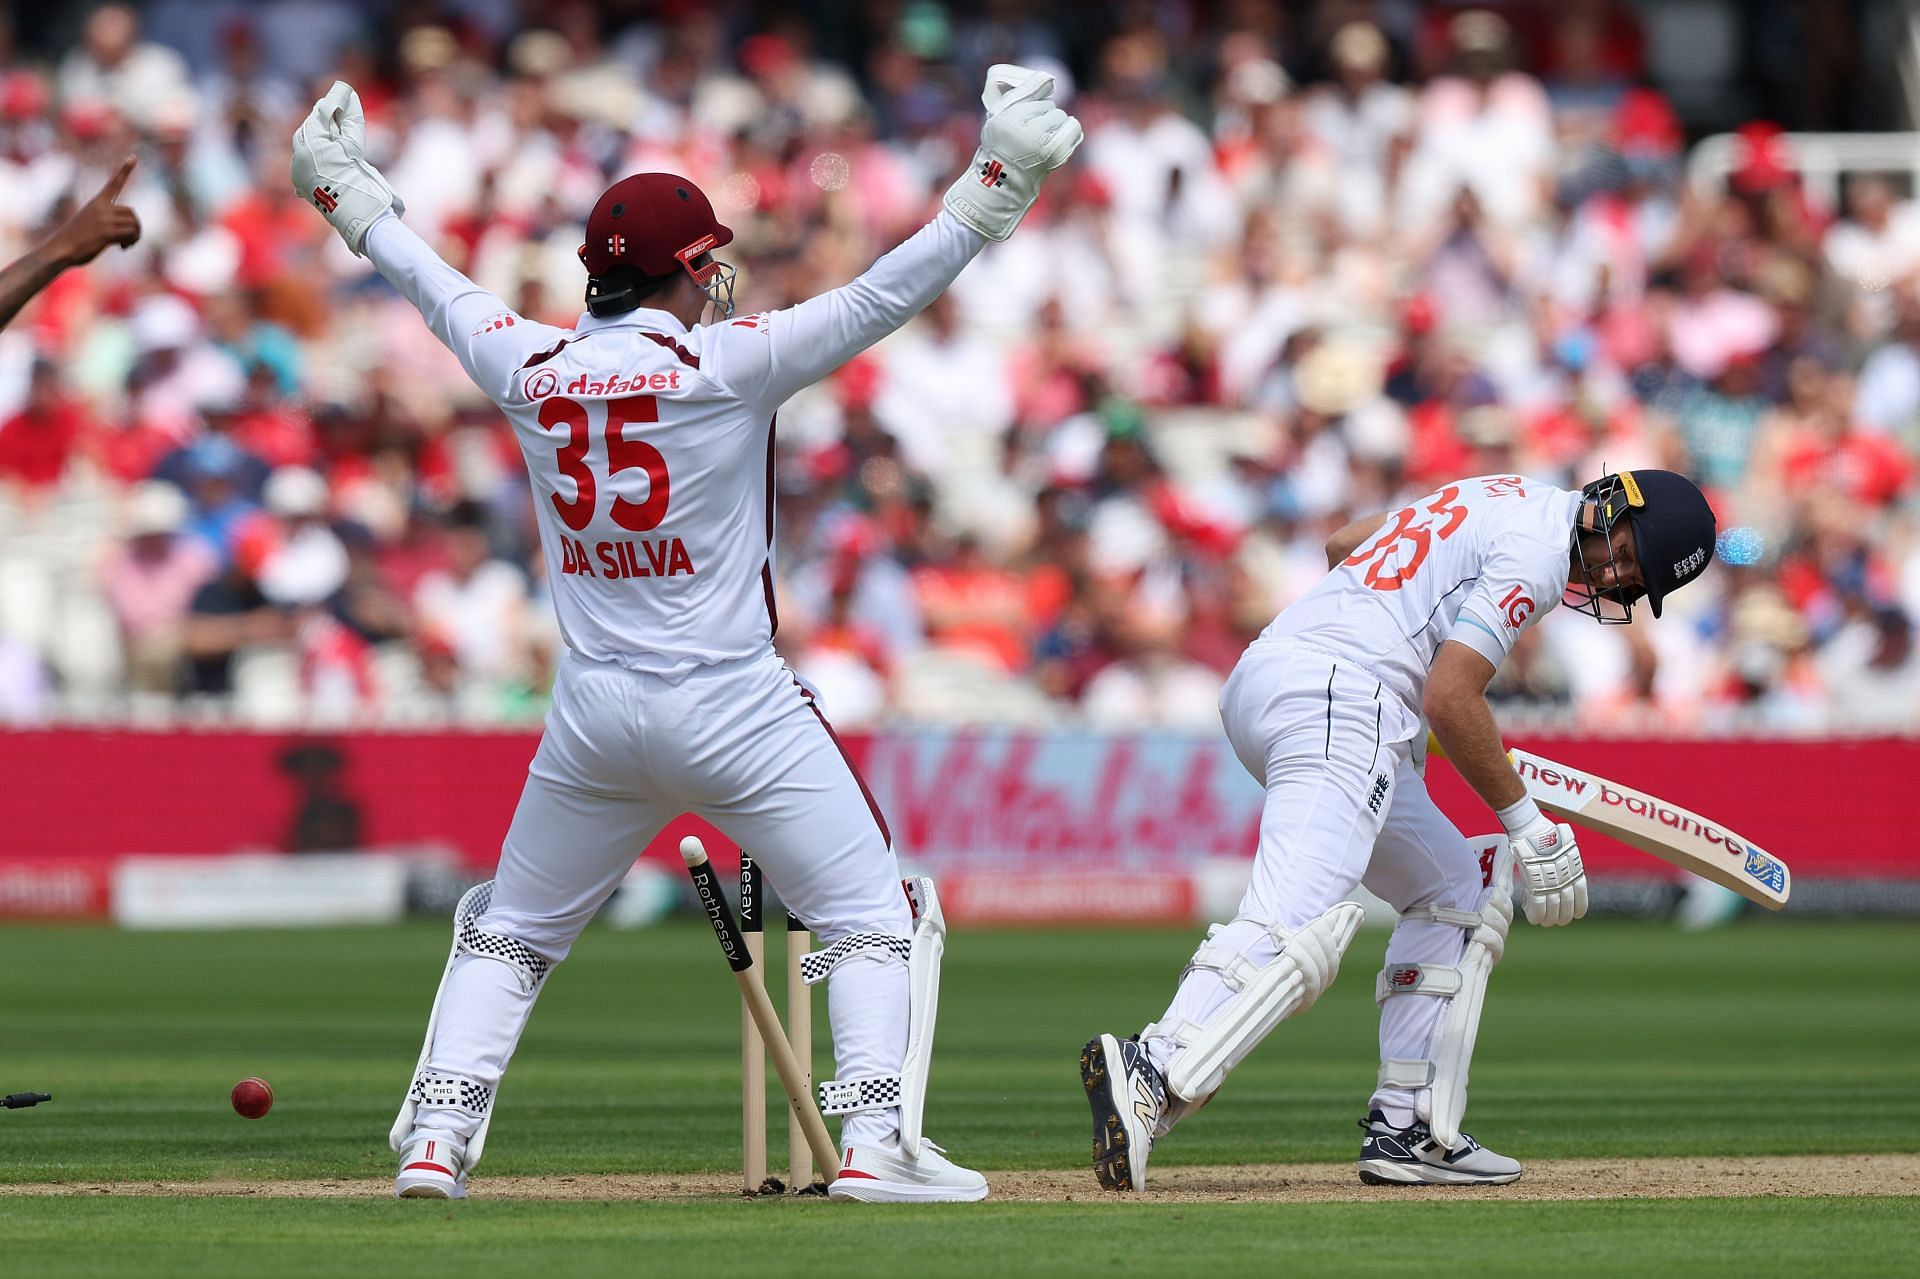 [Watch] Gudakesh Motie removes Joe Root with a stunner in ENG vs WI 1st Test